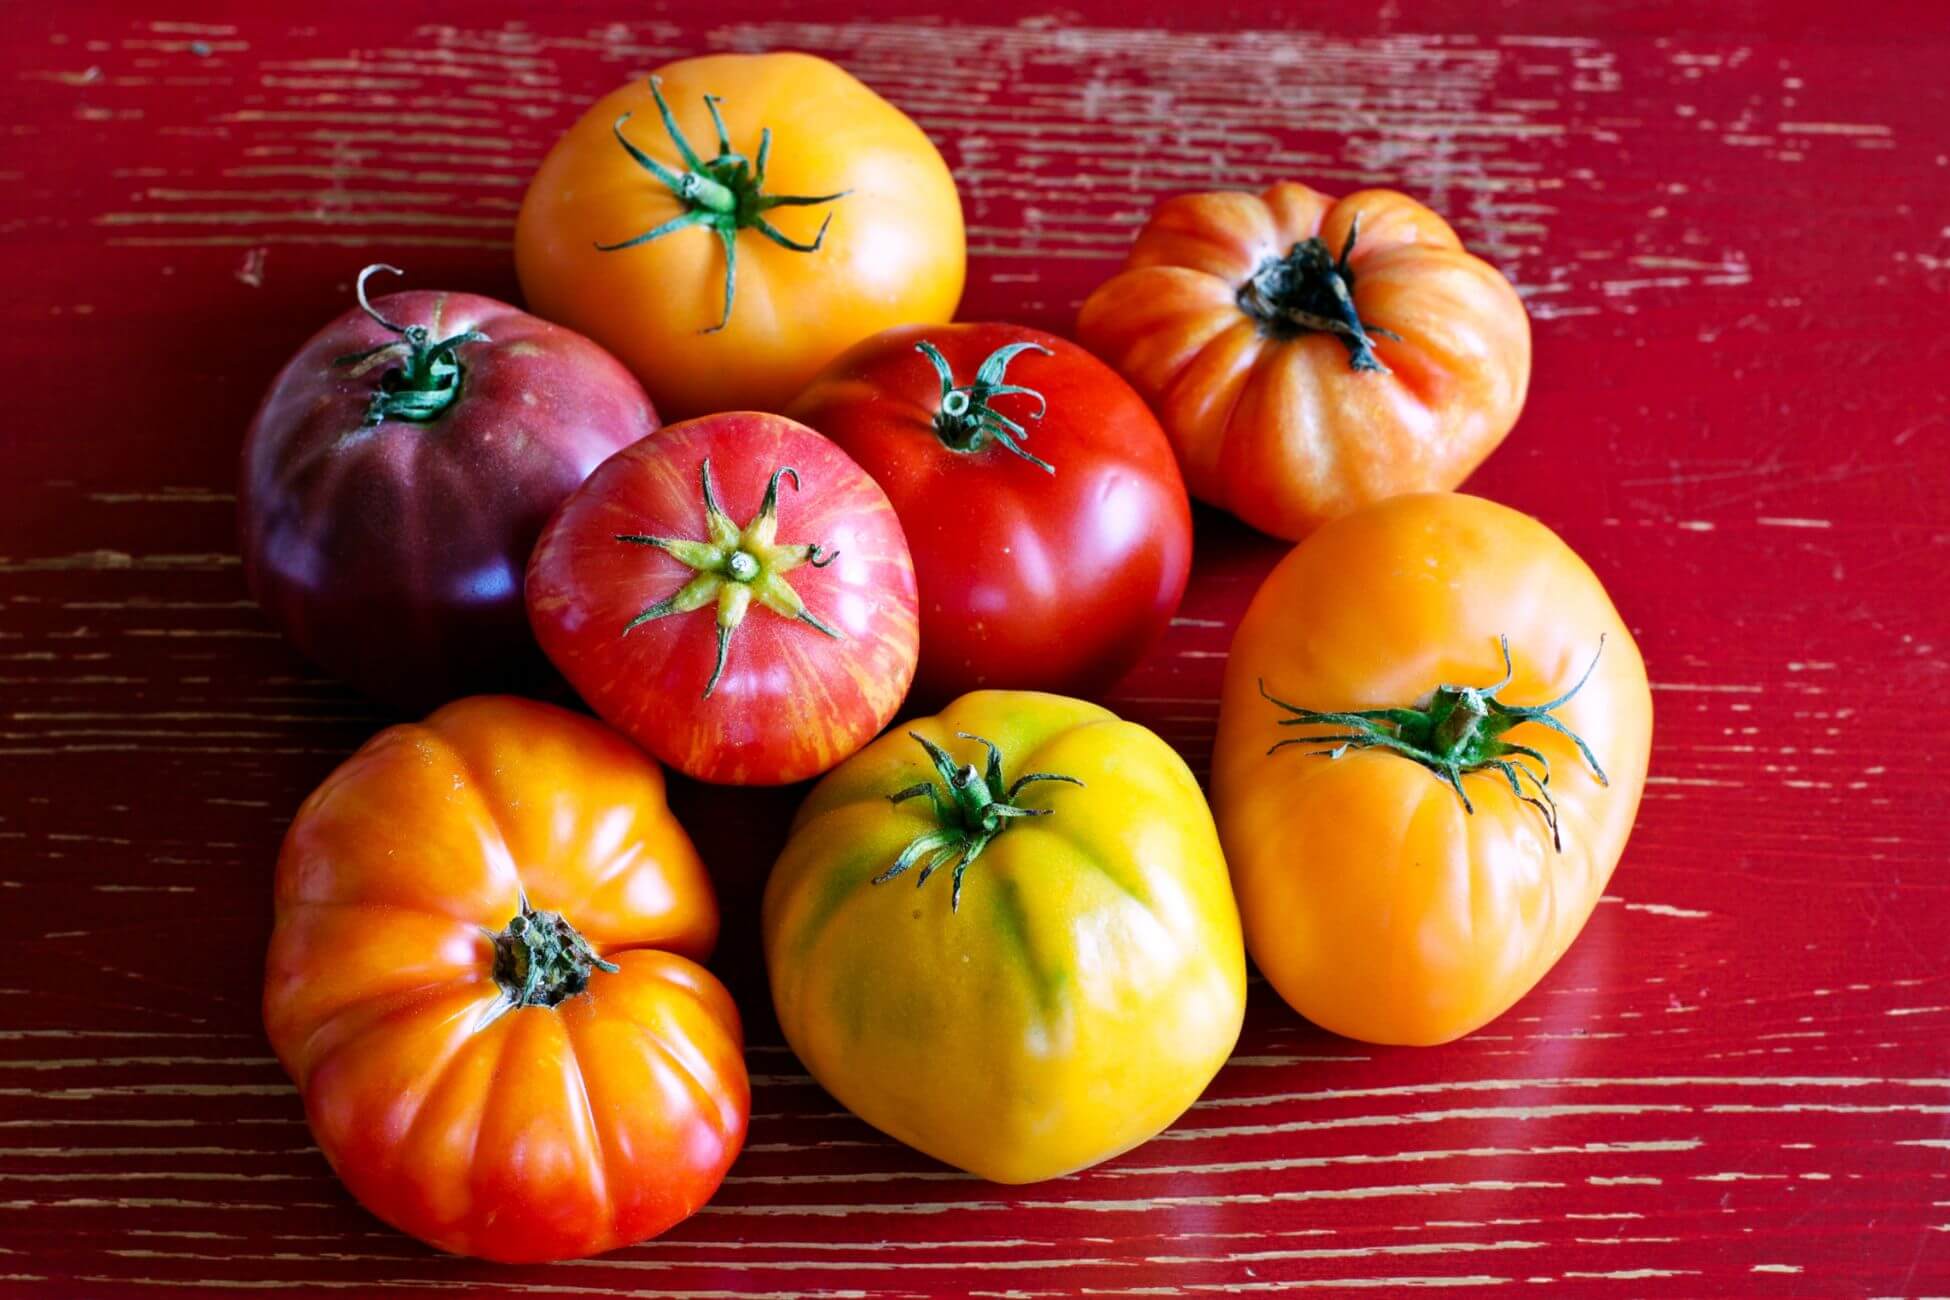 Colorful heirloom and open-pollinated tomatoes on a distressed red wooden surface, displaying shades of yellow, orange, red, and purple in diverse shapes and sizes.